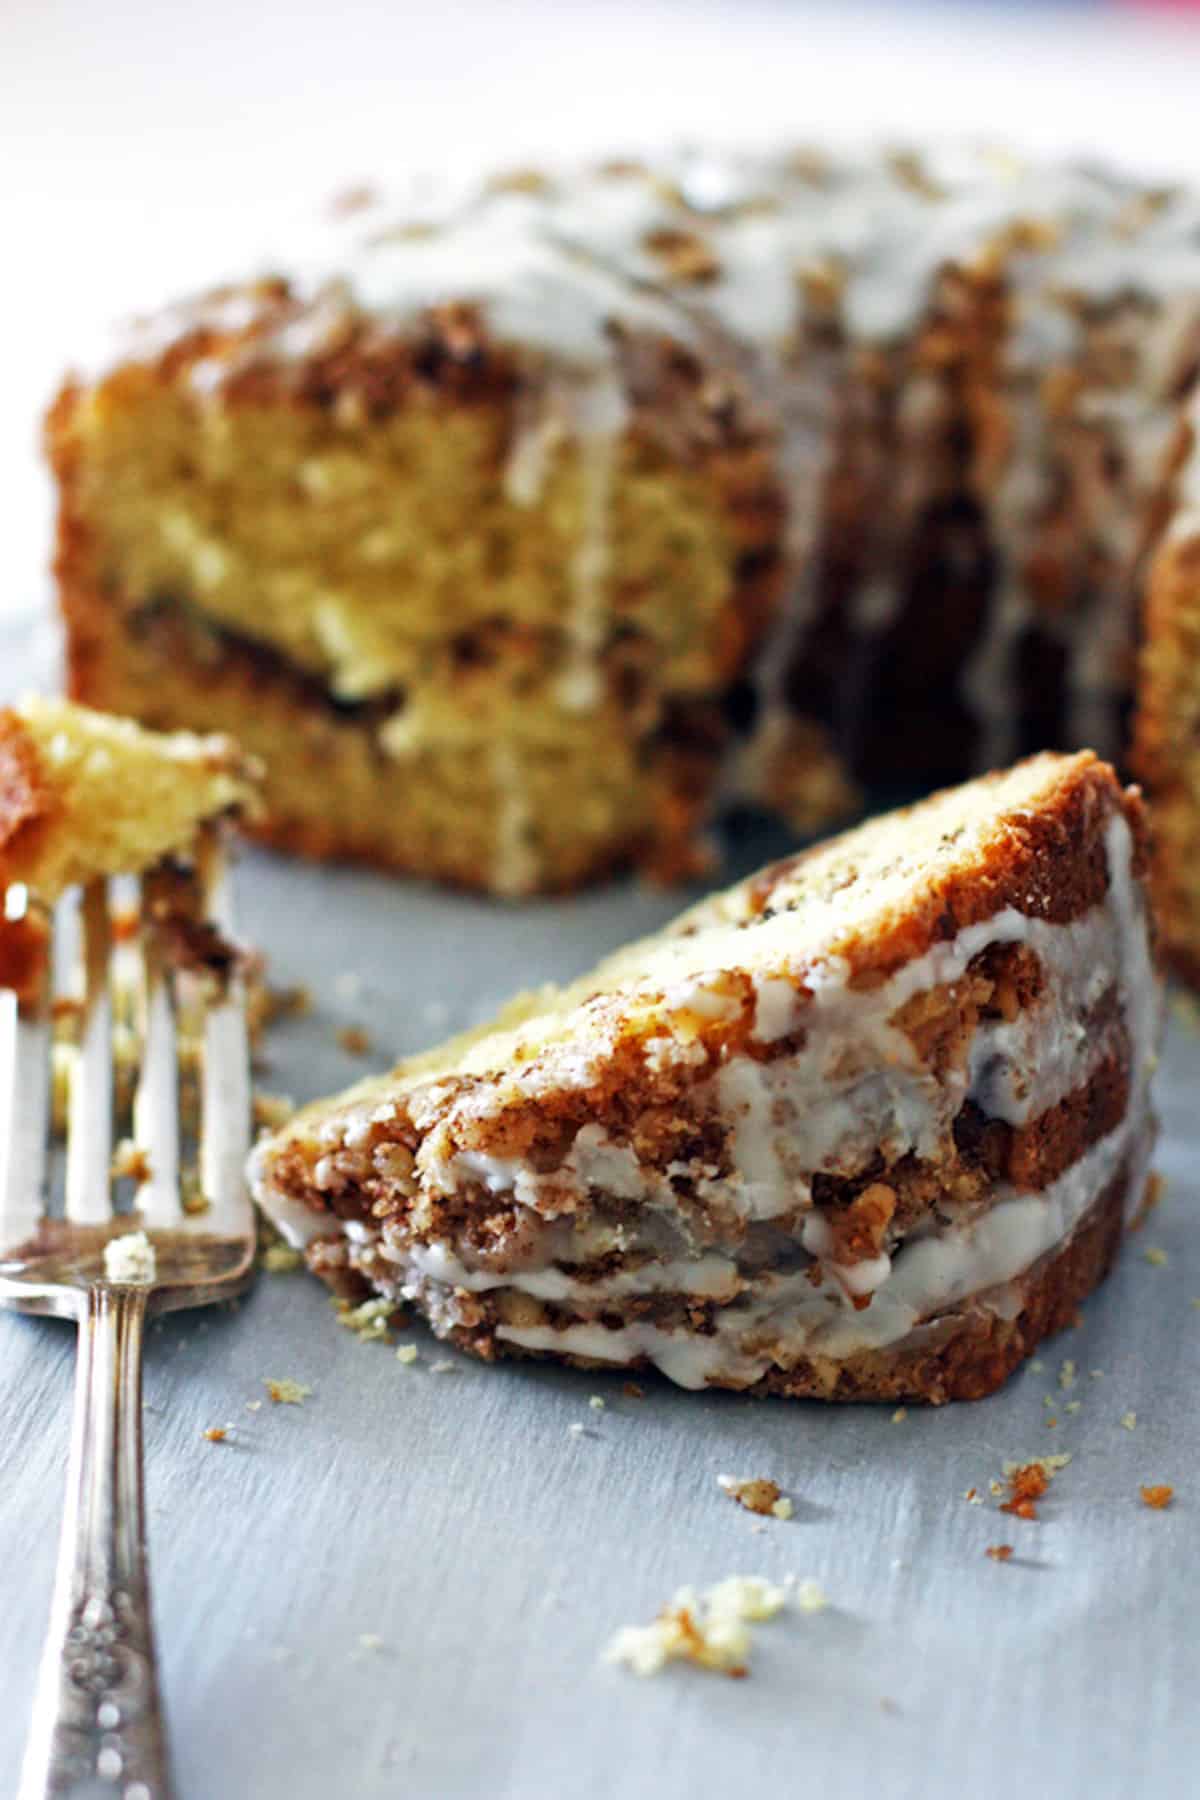 A slice of cinnamon sour cream coffee cake in front of the rest of the cake.